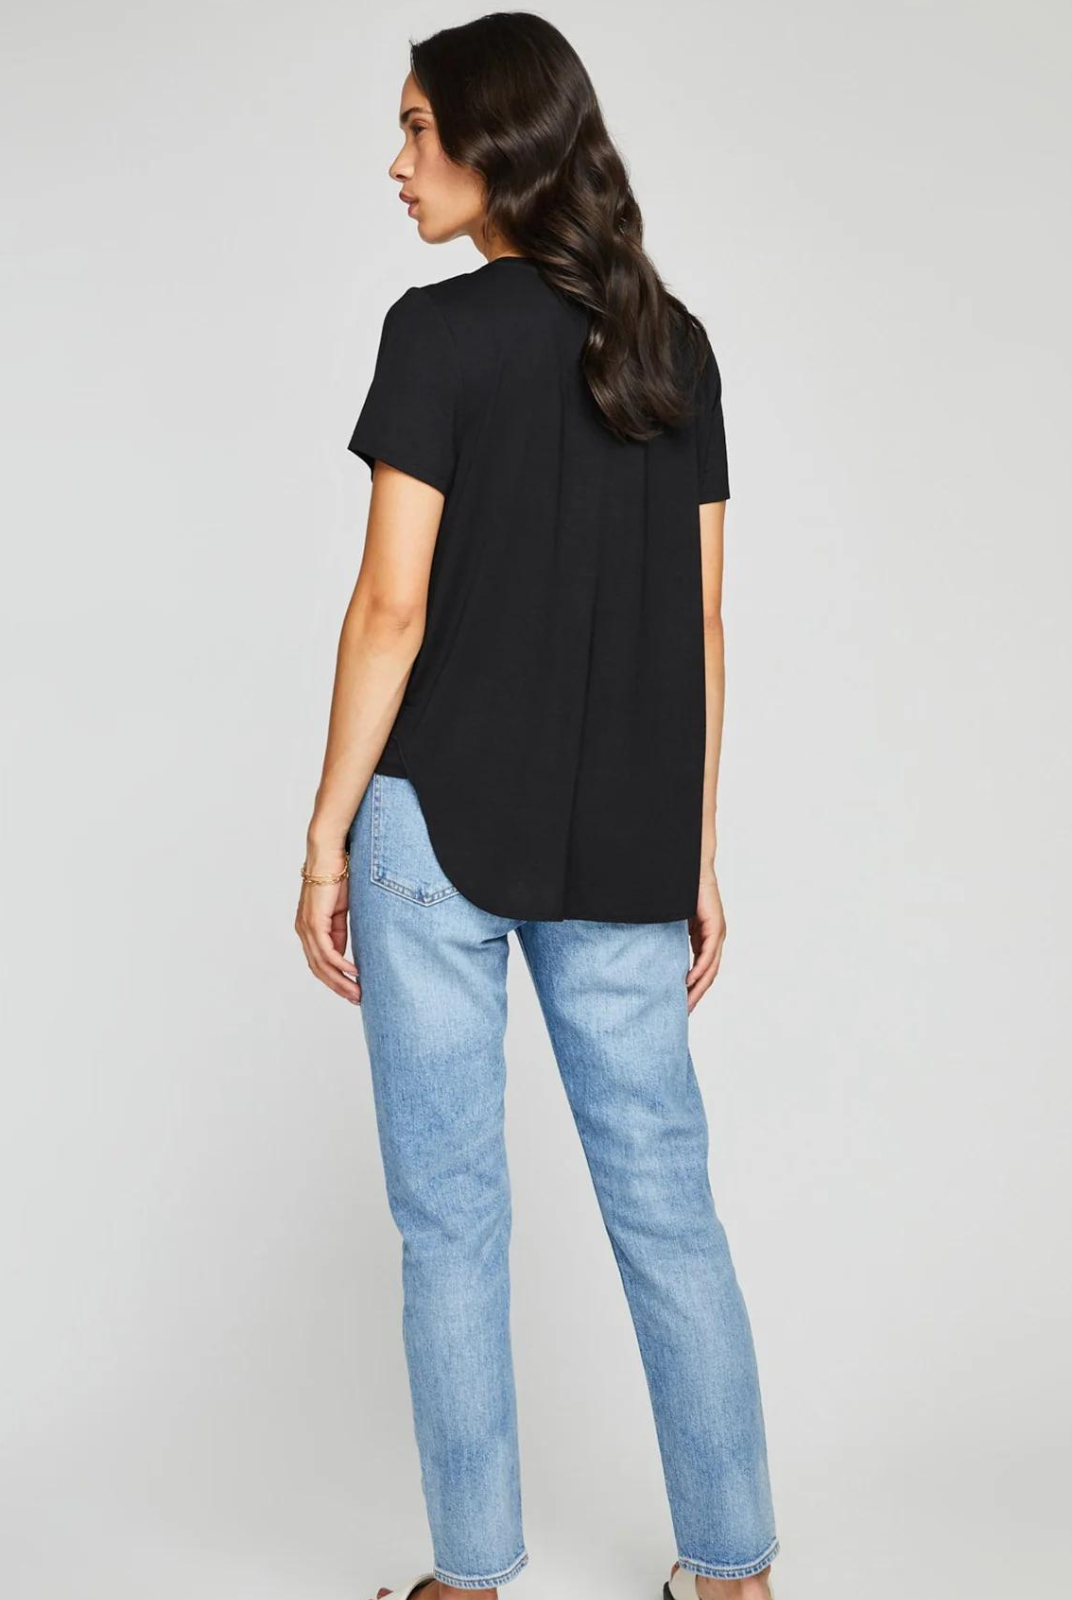 Gentle Fawn Alabama Top- Black. The Alabama tee is a Gentle Fawn classic designed for every day. Made of super soft EcoVero rayon jersey, it’s a closet essential you’ll want in every colour.